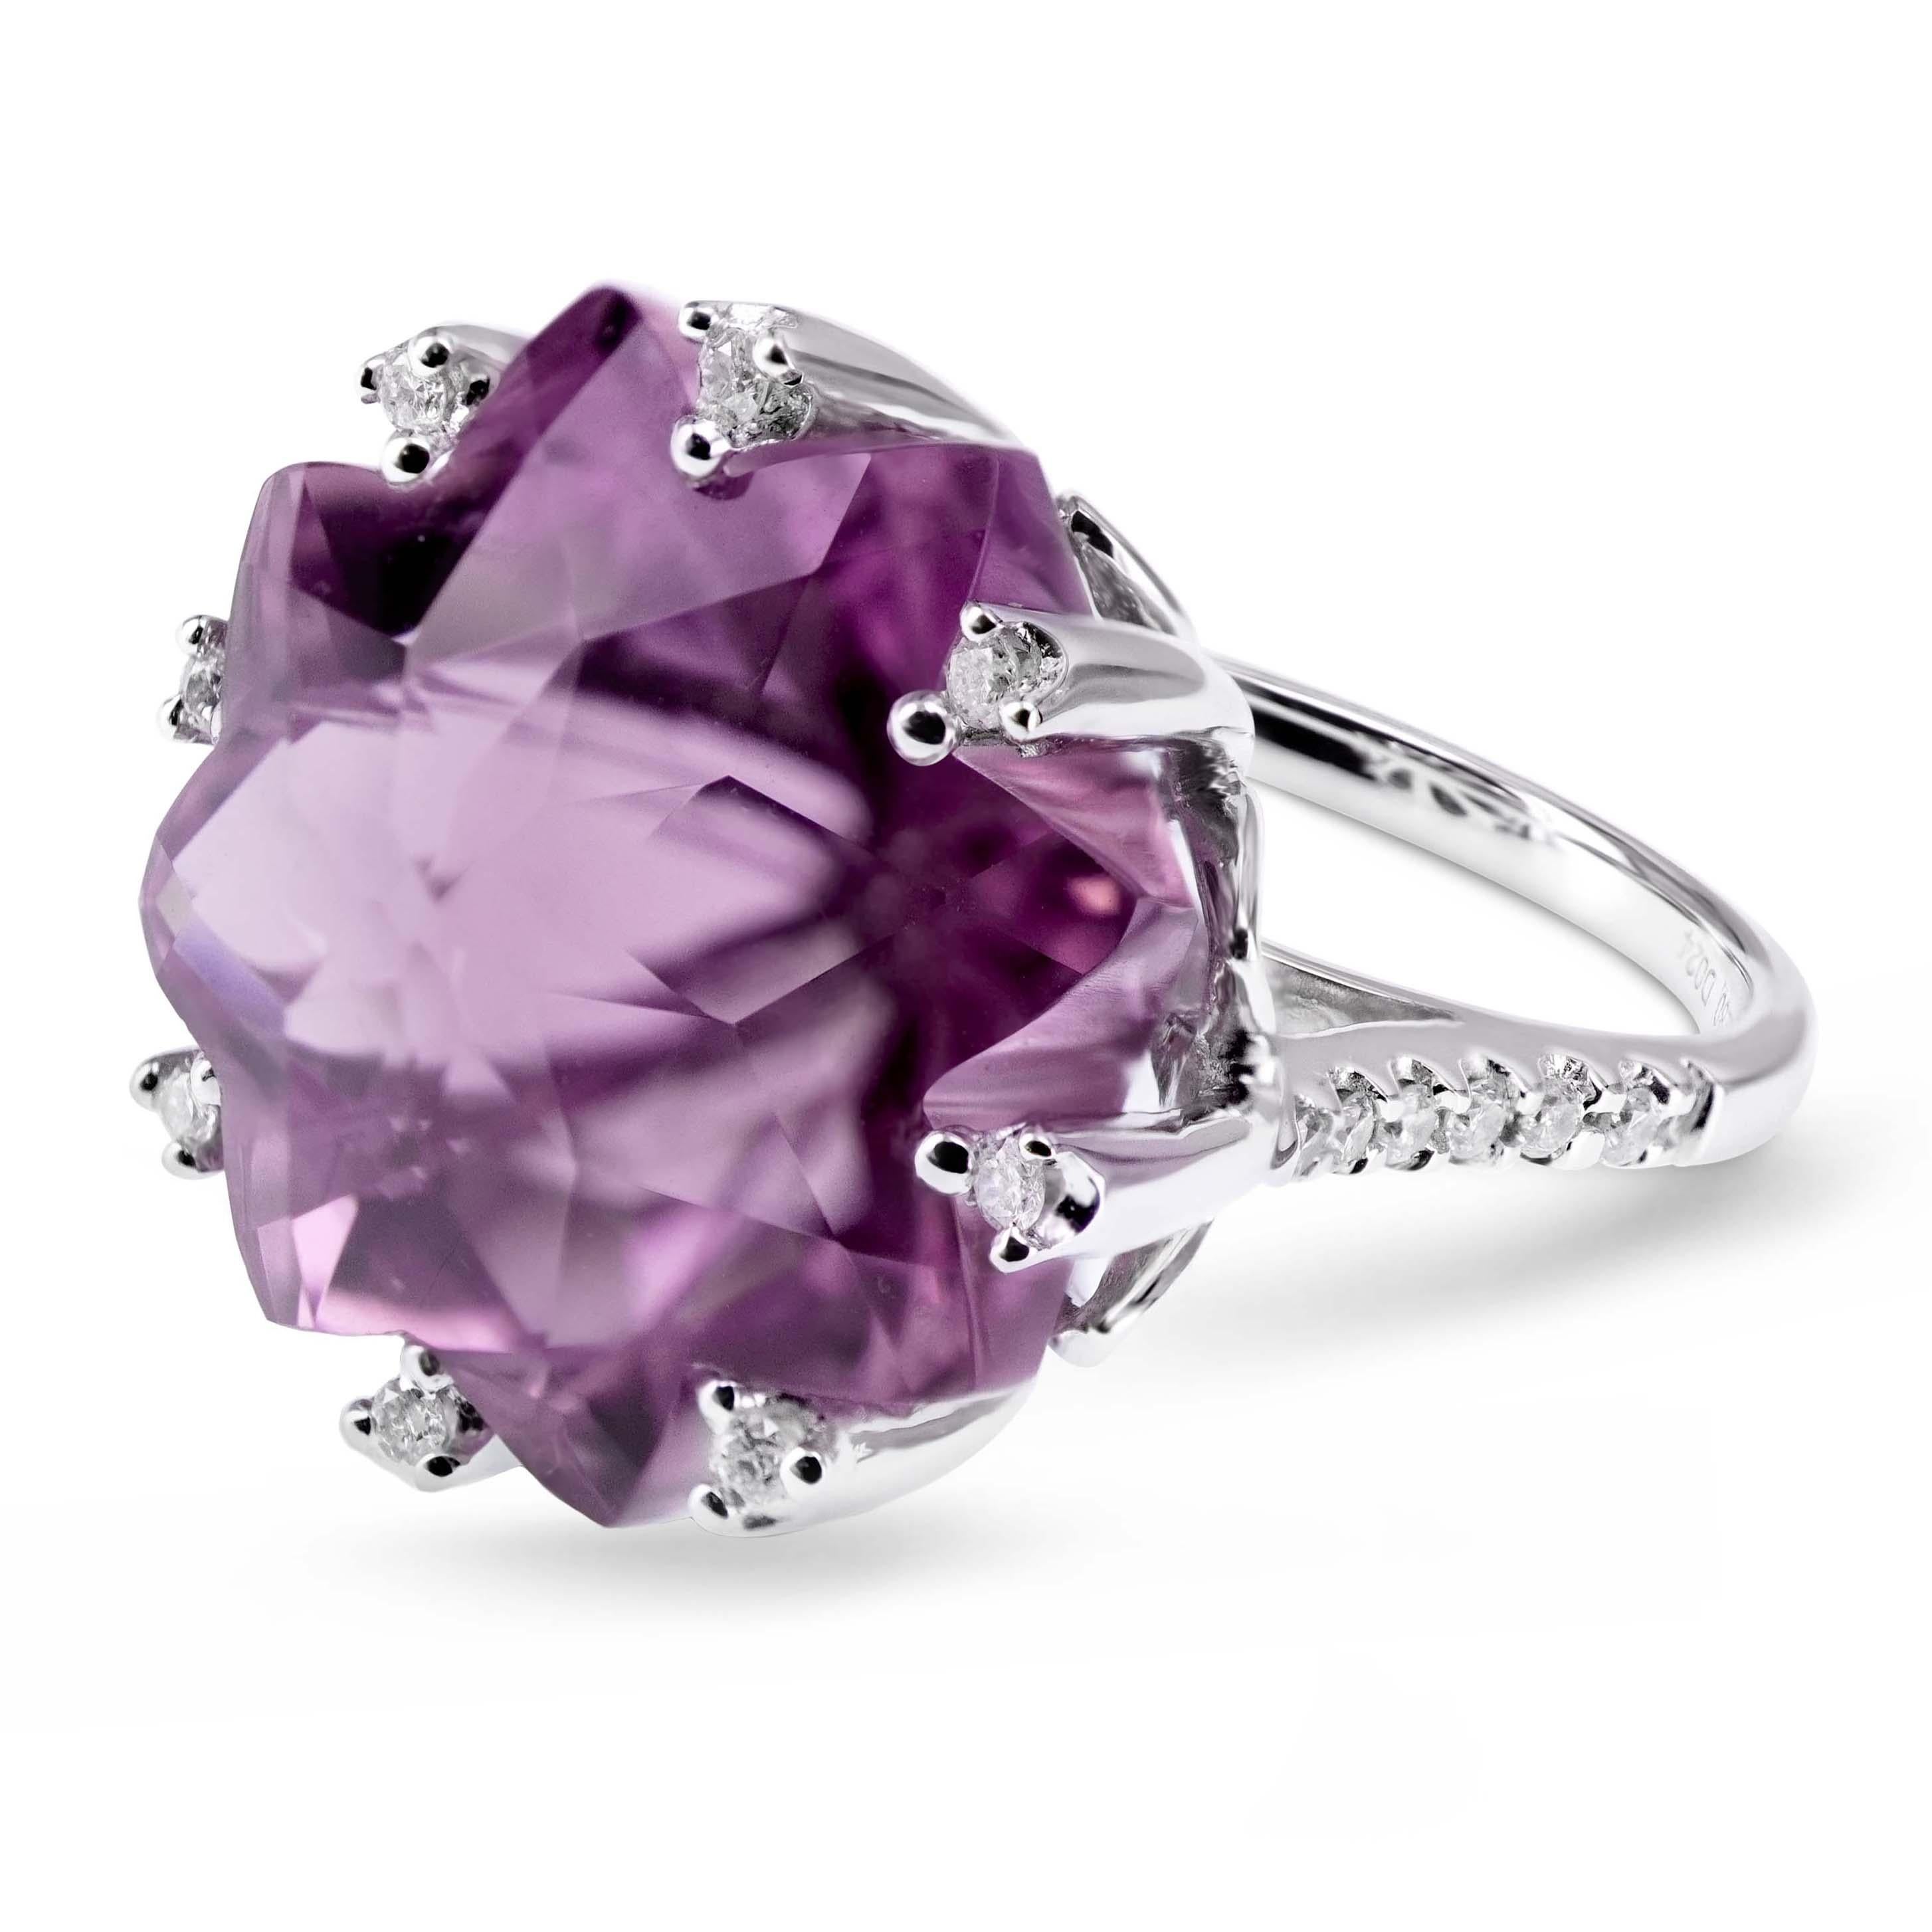 An exquisite 22.80 carat of flower cut Amethyst is set along with 0.24 carat of white brilliant round diamond. Amethyst is the most popular variety of quartz crystals that is considered the most powerful and protective stone. It is a semiprecious